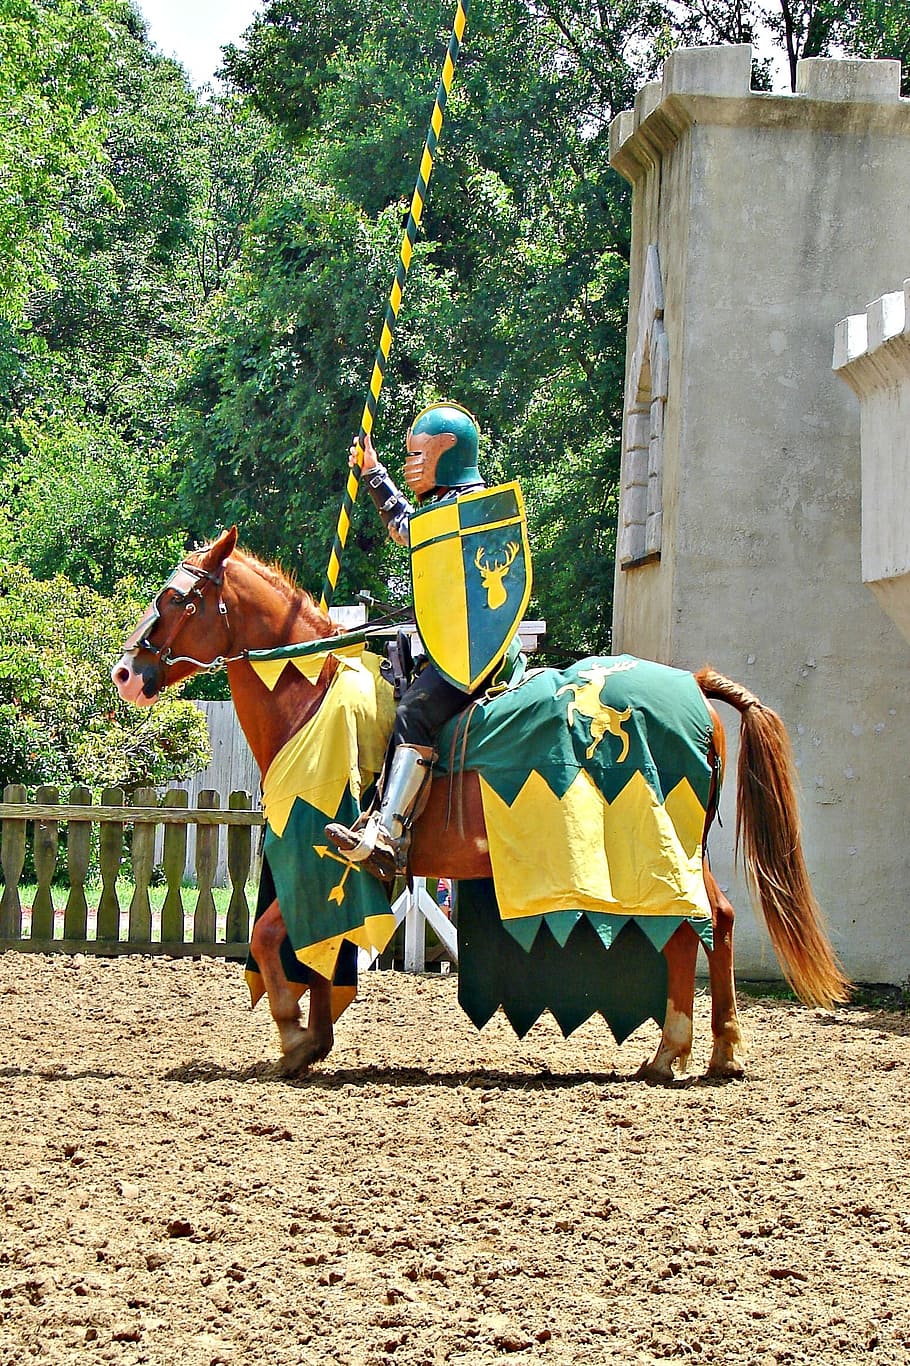 horse, knight, jousting, medieval, man, green, yellow, warrior, chivalry, armor